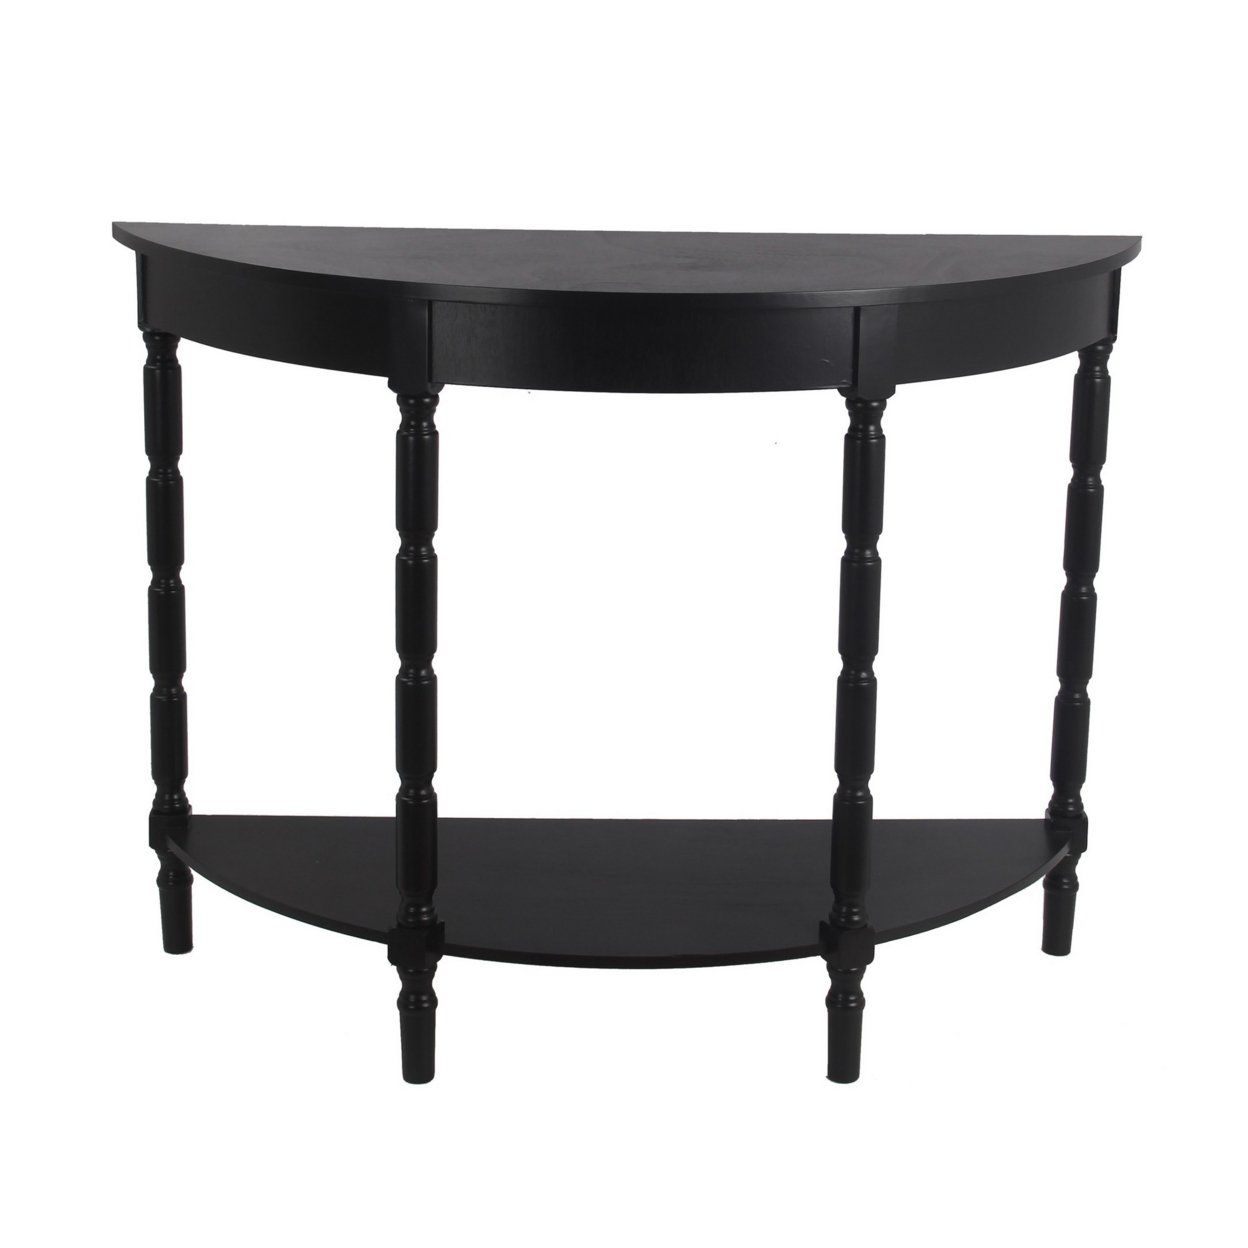 Half Moon Wooden Console Table with Open Shelf and Turned Legs, Gray- Saltoro Sherpi | Walmart (US)